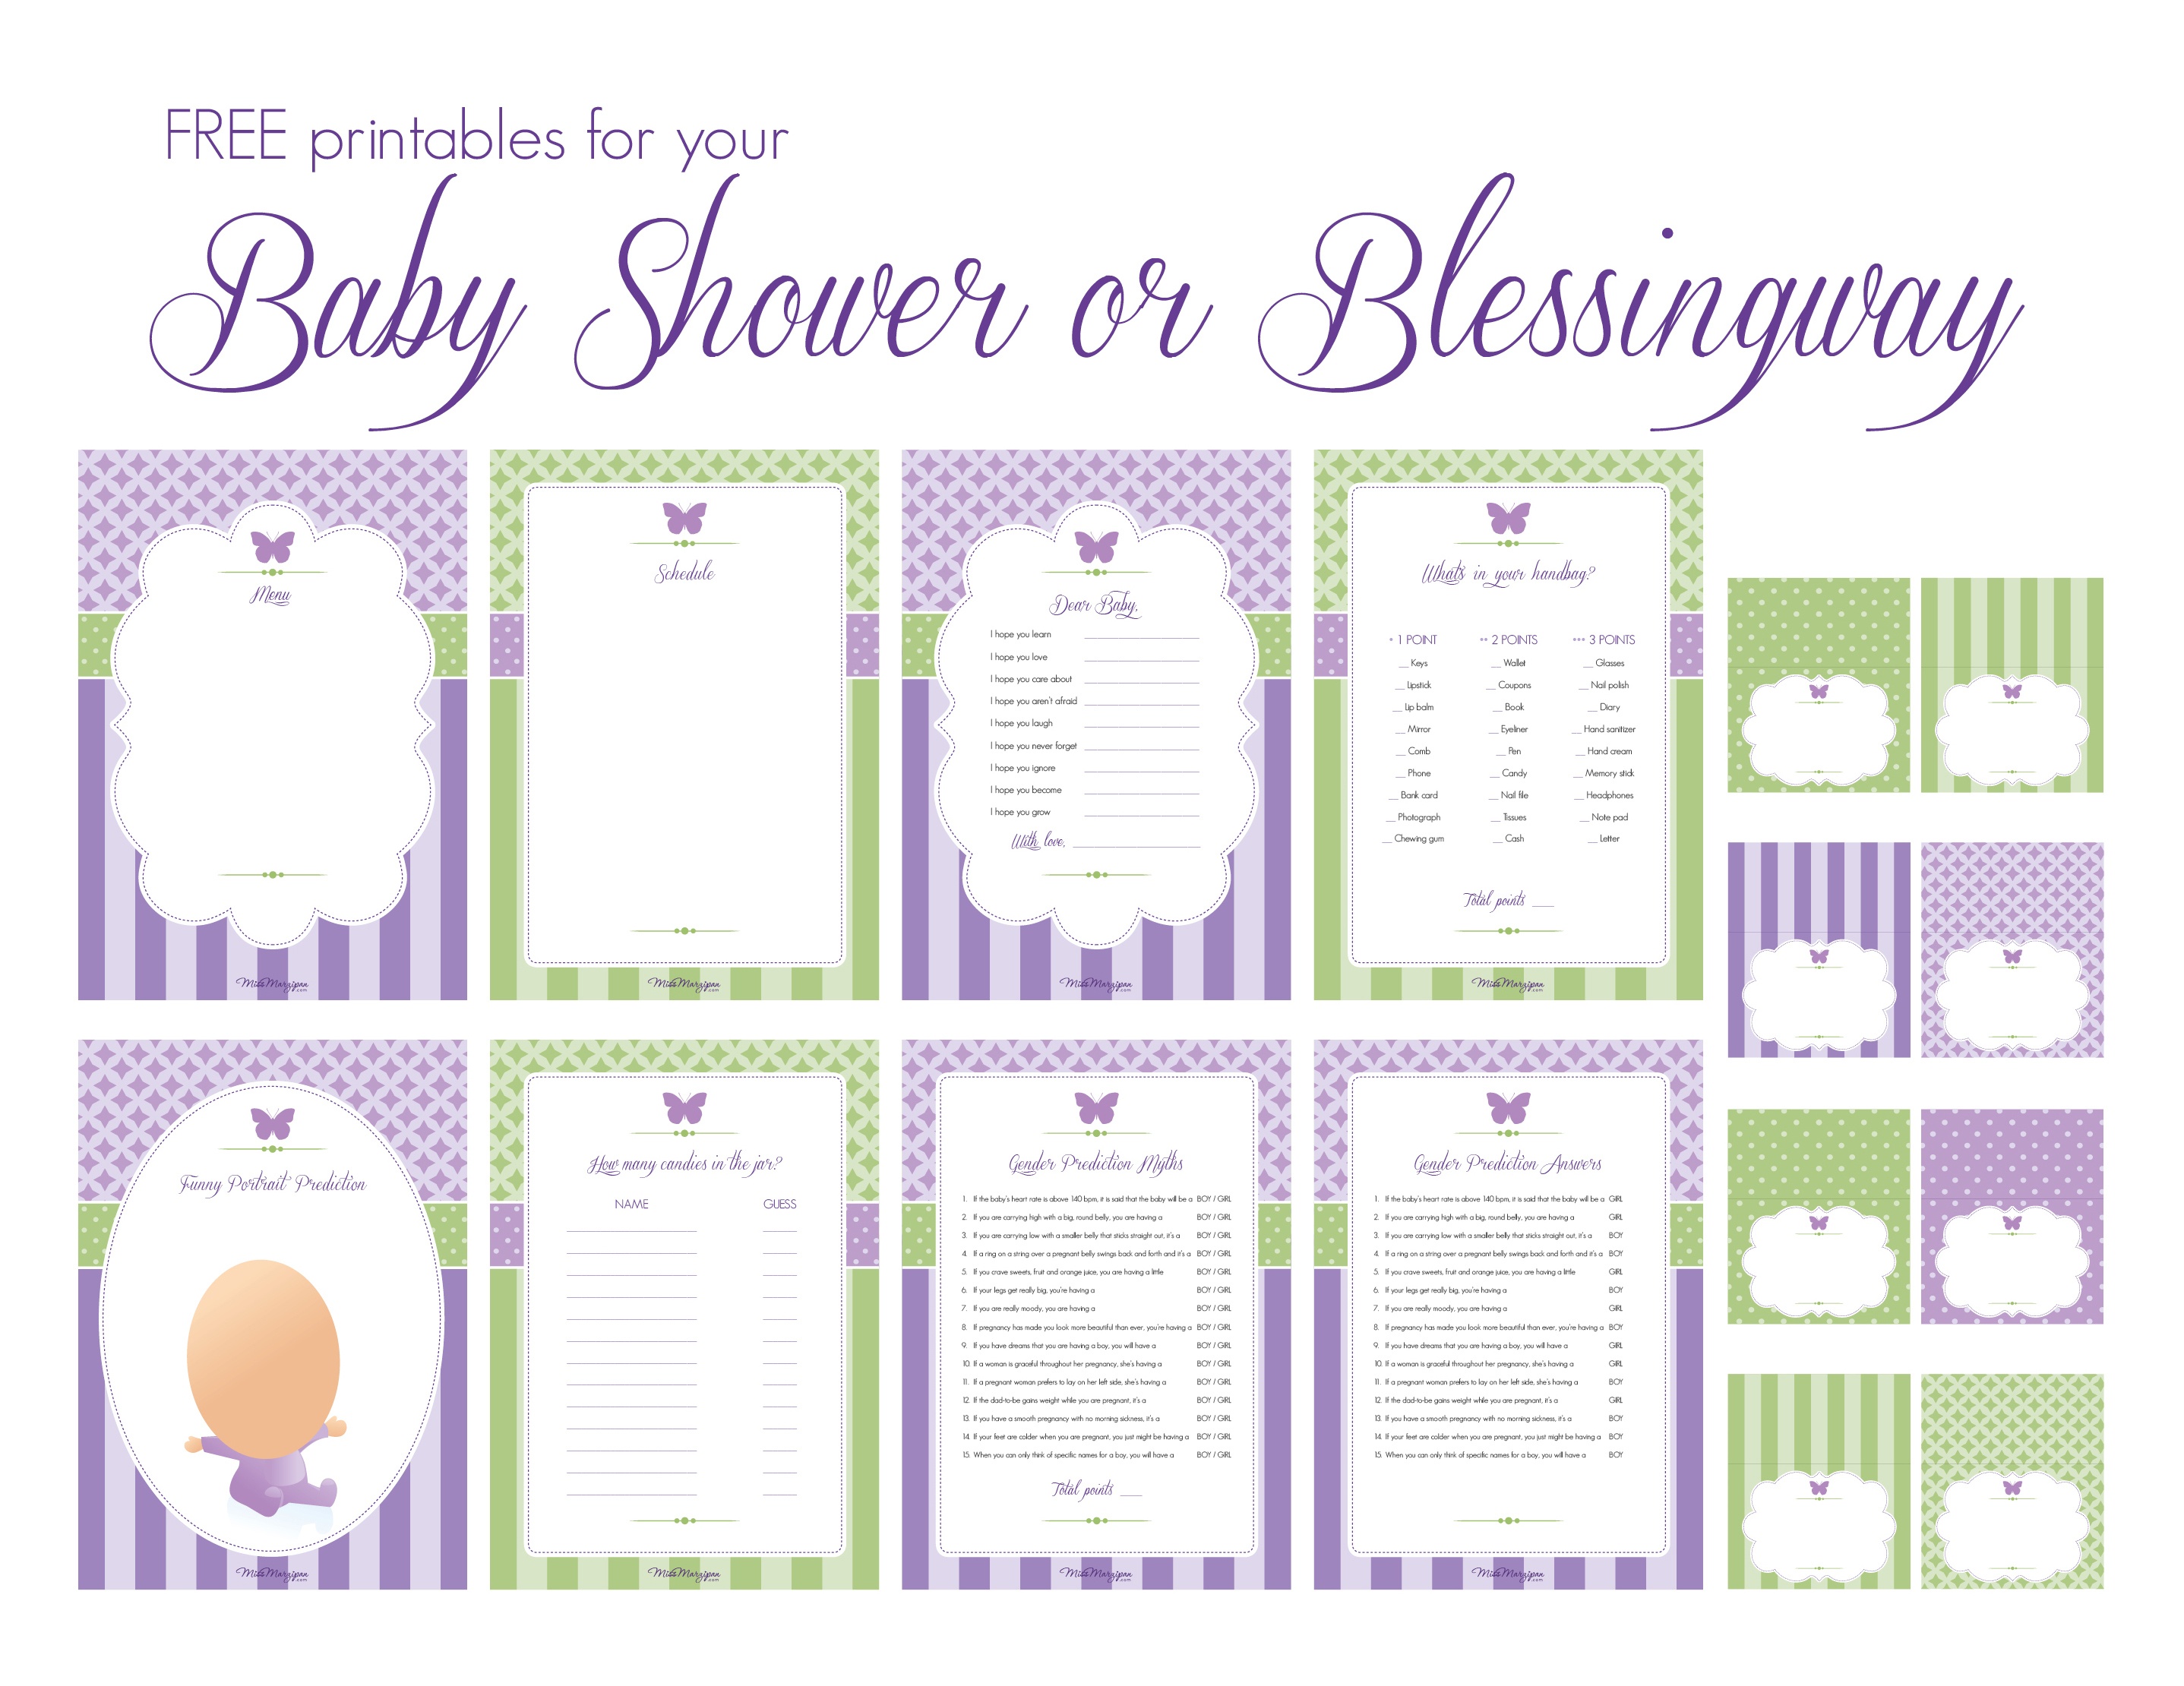 Photo : Printable Baby Shower Games Image - Free Printable Baby Shower Decorations For A Boy